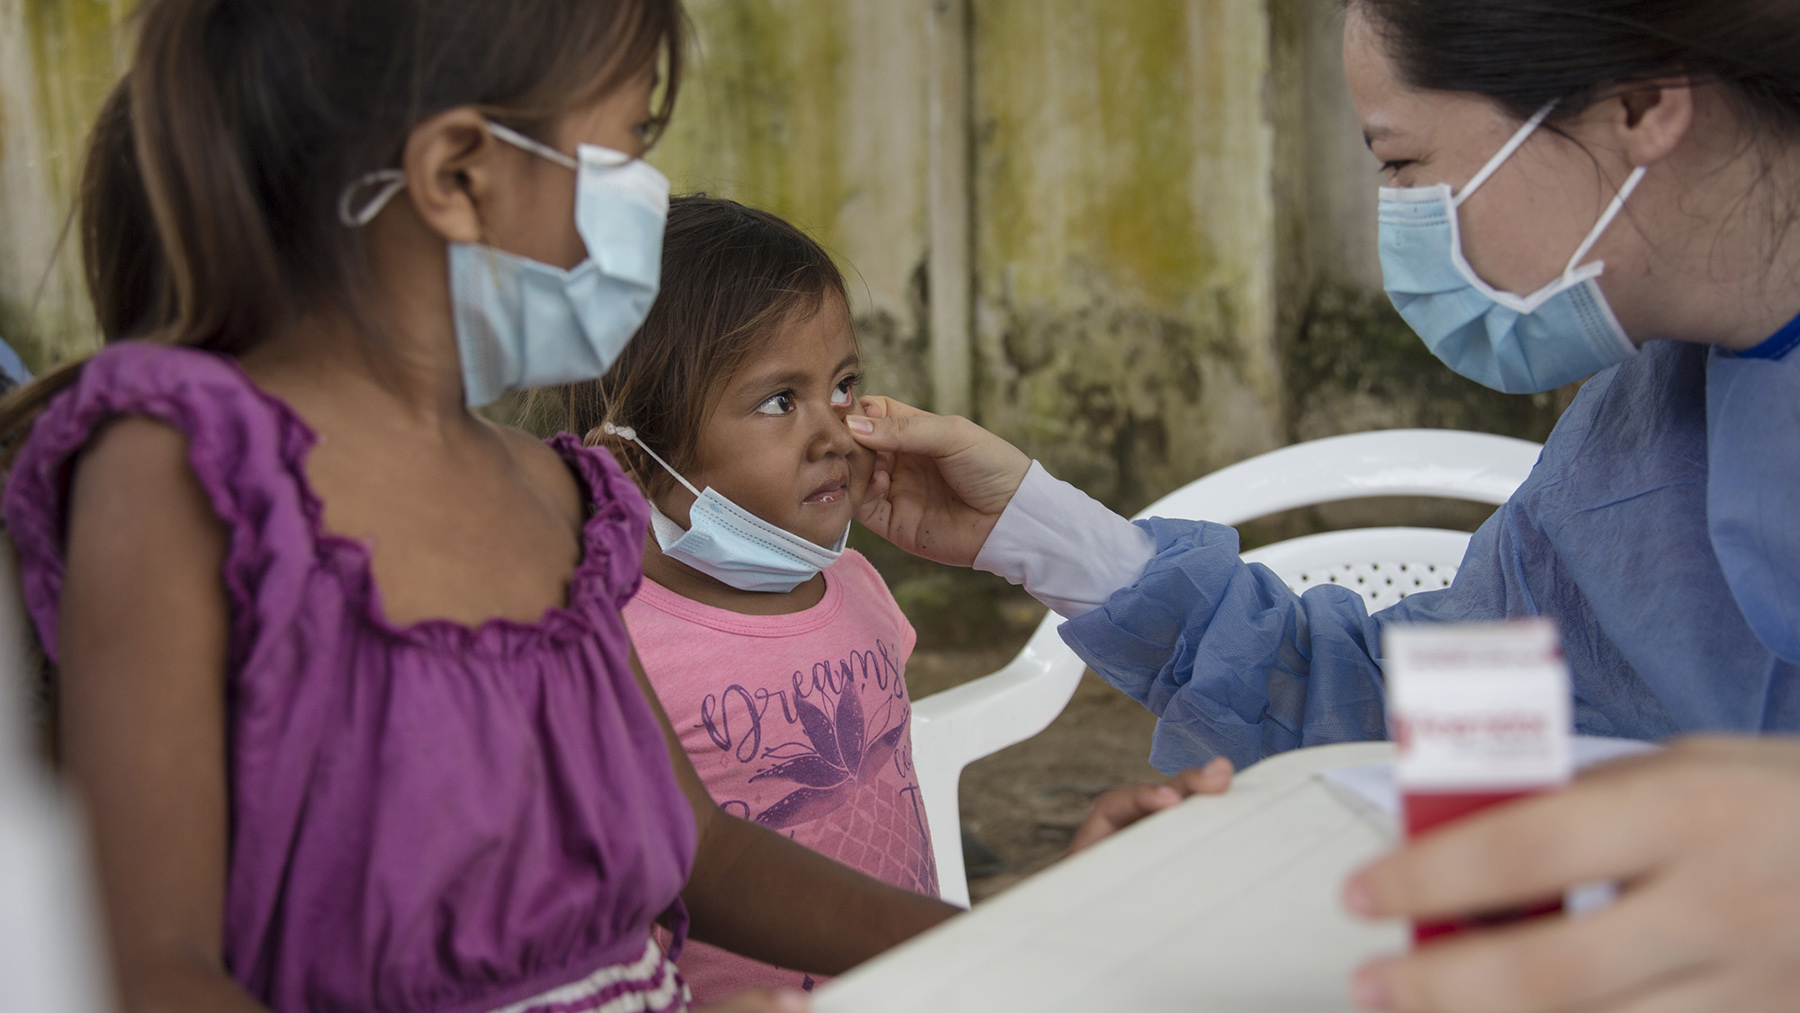 A health provider examines a young patient in Catatumbo, Colombia, in April 2021. The health outreach was supported by nonprofit Banco de Medicamentos, which Direct Relief has provided with funding and medical support. Over the past weekm more than $1.2 million in medical aid has departed for health facilities in Colombia. (Photo by Oscar Castillo for Direct Relief)